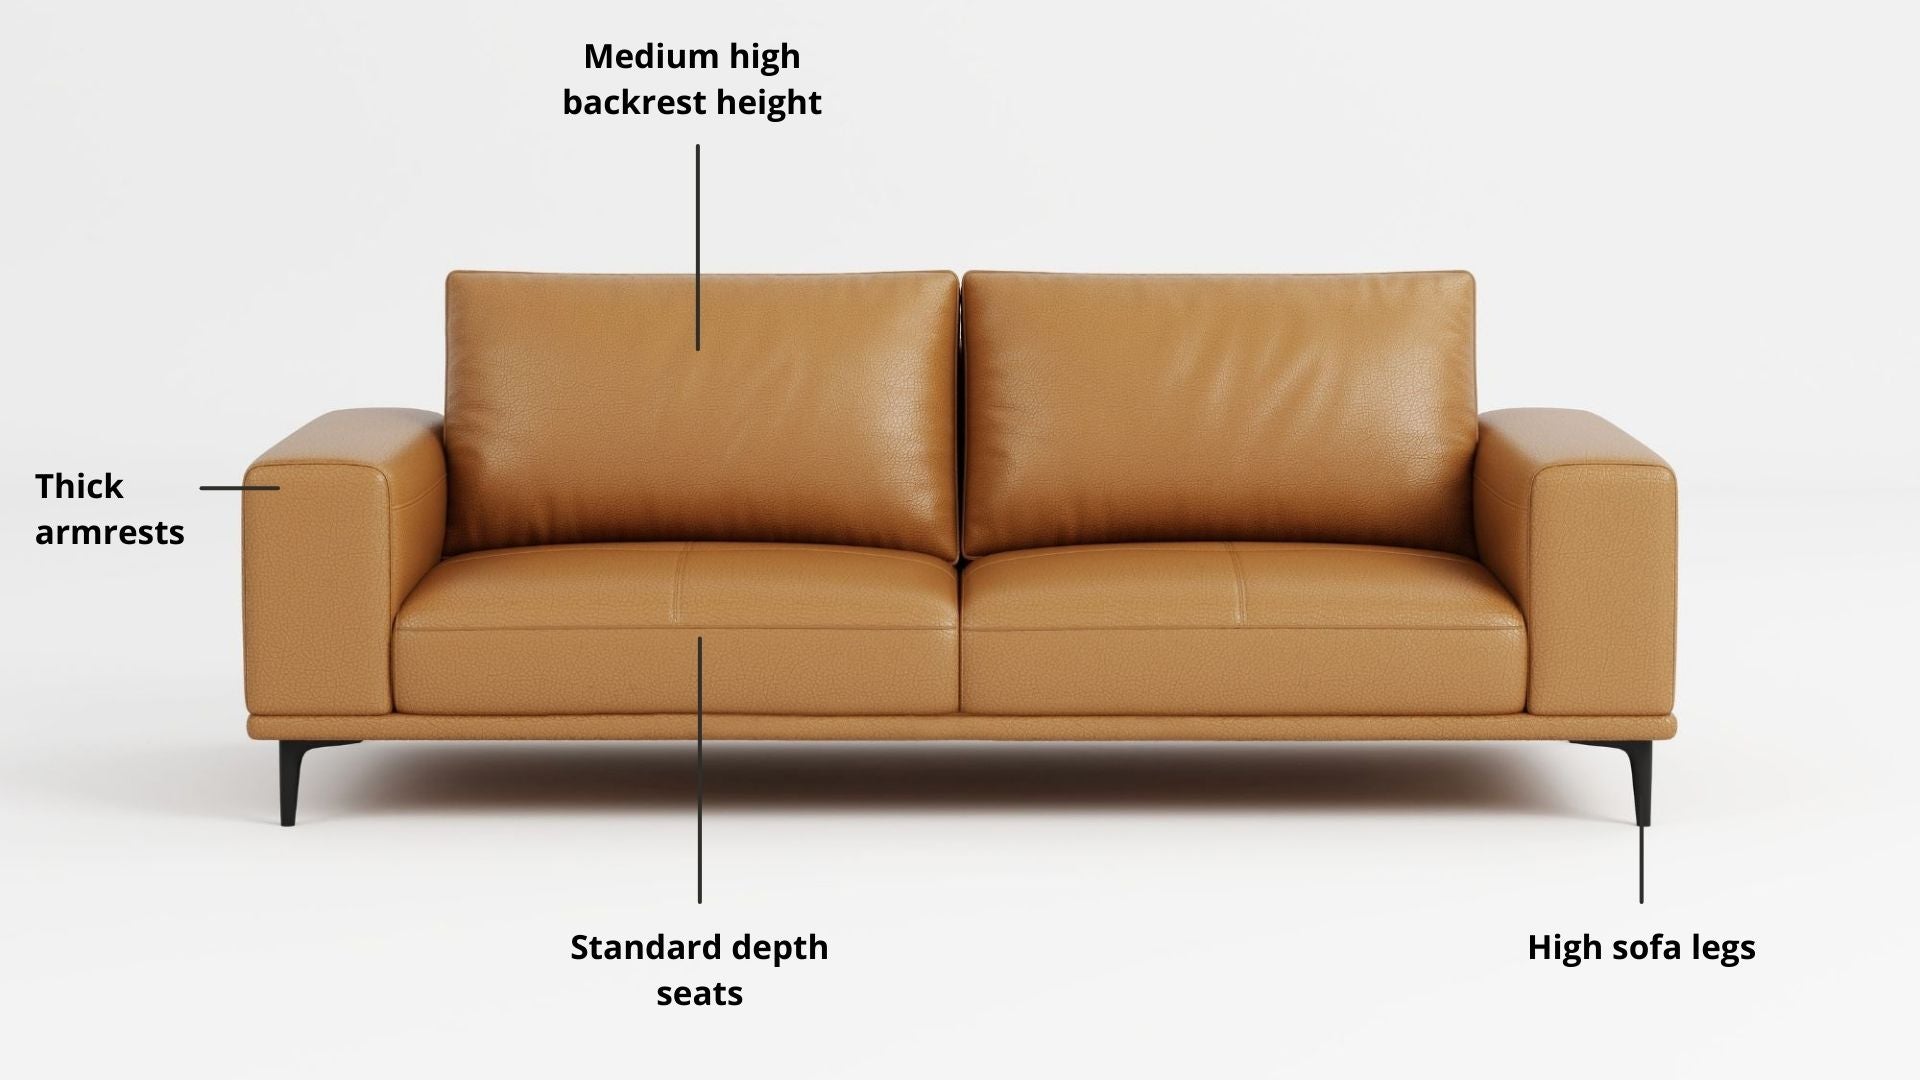 Key features such as armrest thickness, cushion height, seat depth and sofa leg height for Calm Half Leather Sofa